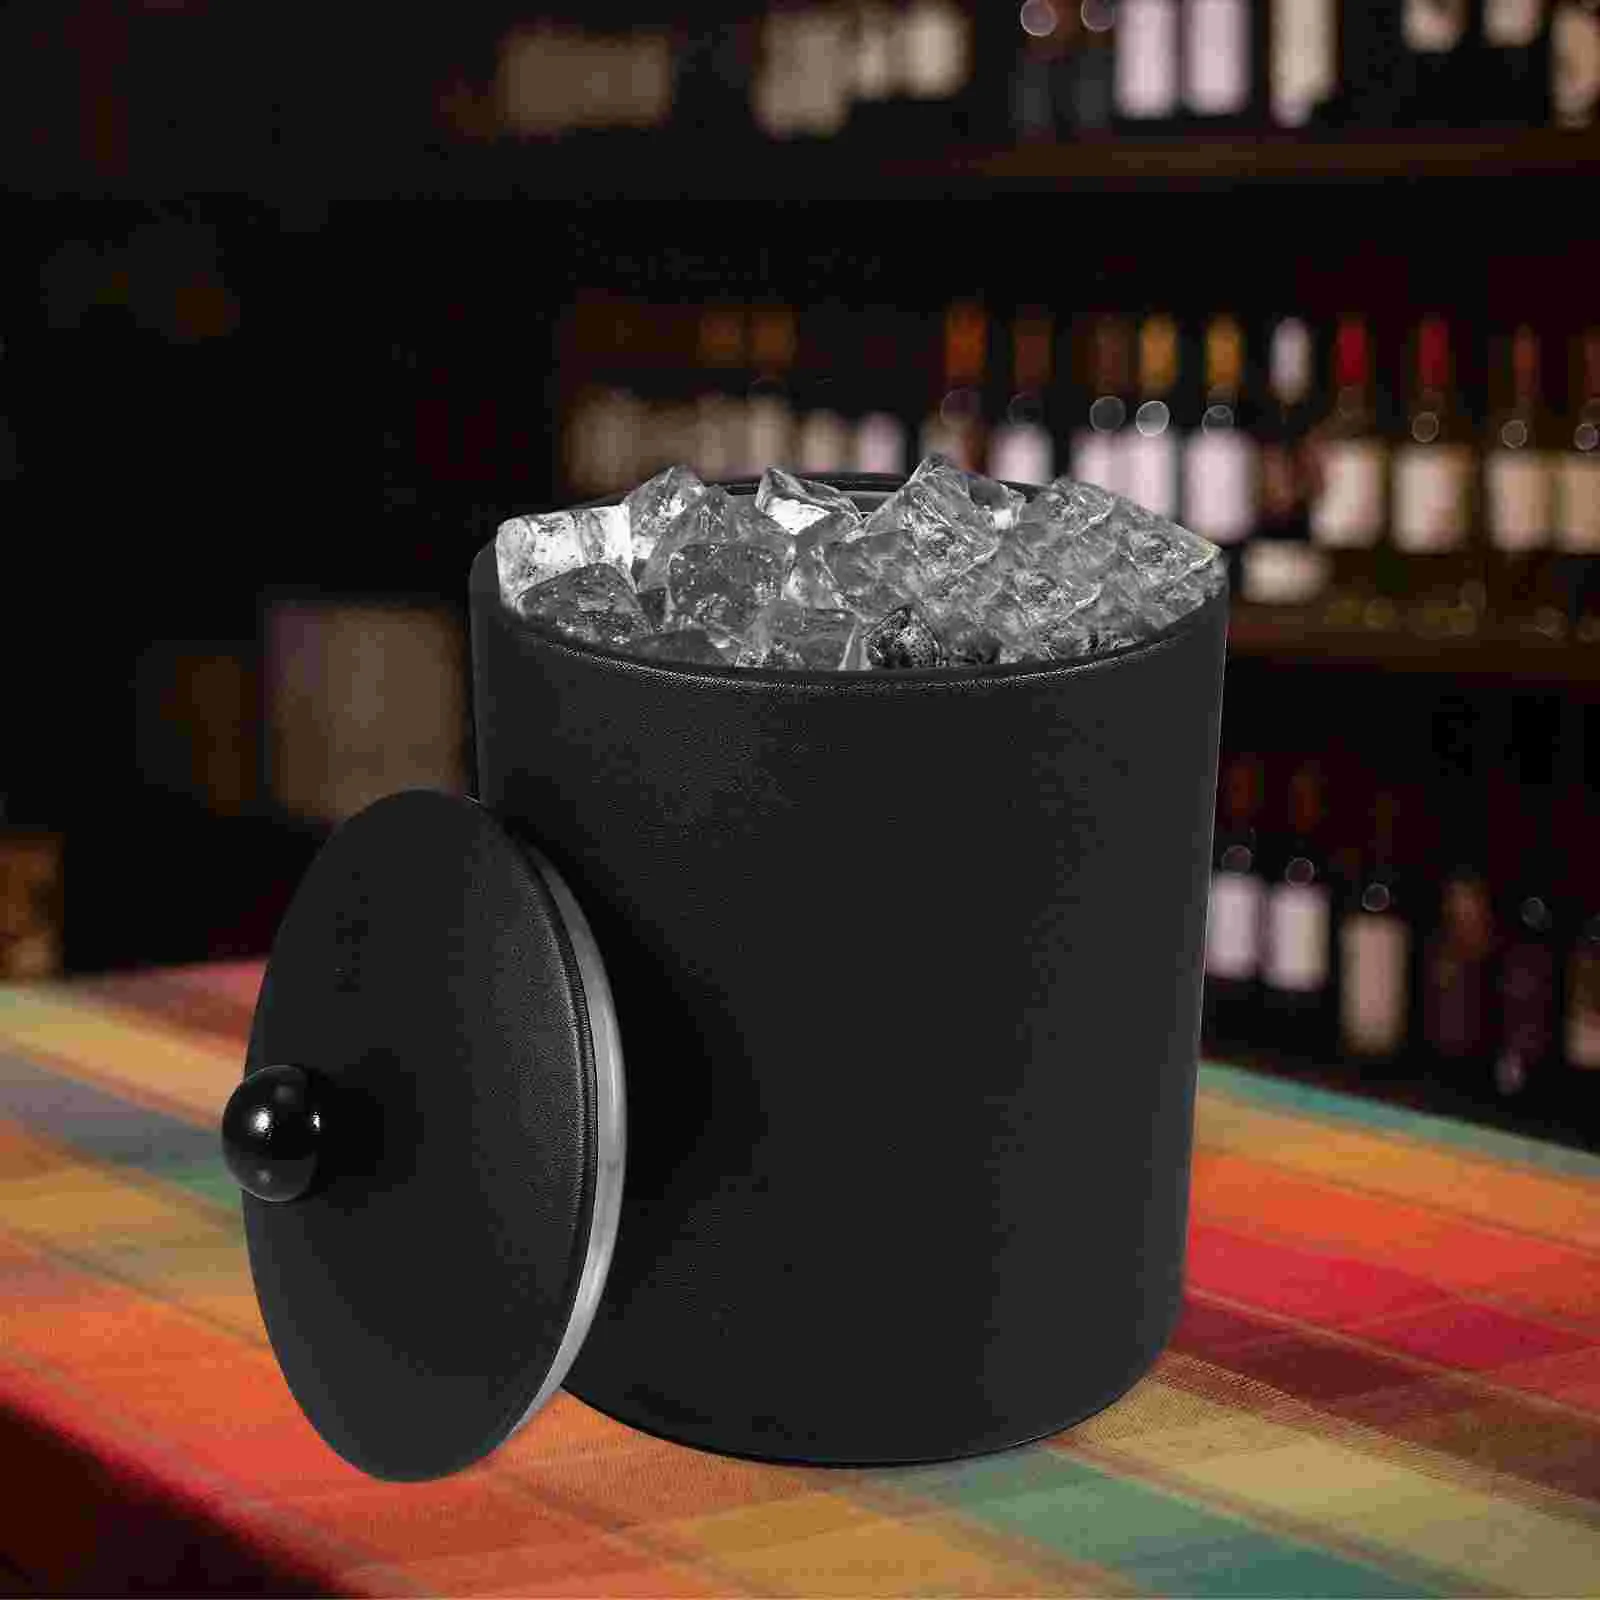 

Ice Bucket Beverage Chillercooler Buckets Cocktail Beer Tub Bar Drink Champagne Bottle Holder Insulated Lid With Pail Tubs